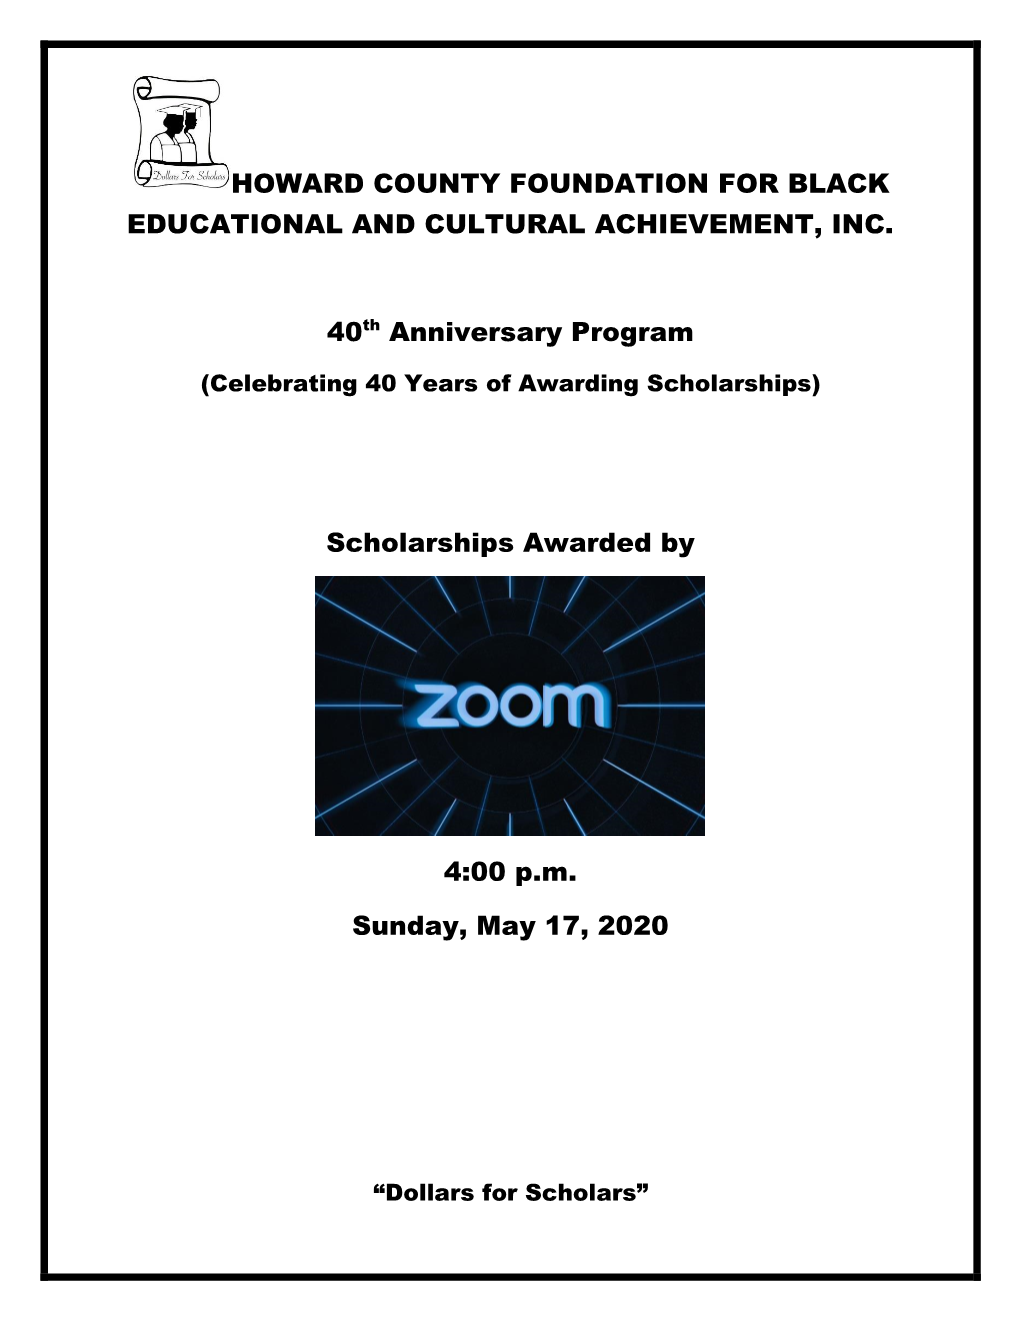 HOWARD COUNTY FOUNDATION for BLACK EDUCATIONAL and CULTURAL ACHIEVEMENT, INC. 40Th Anniversary Program Scholarships Awarded by 4